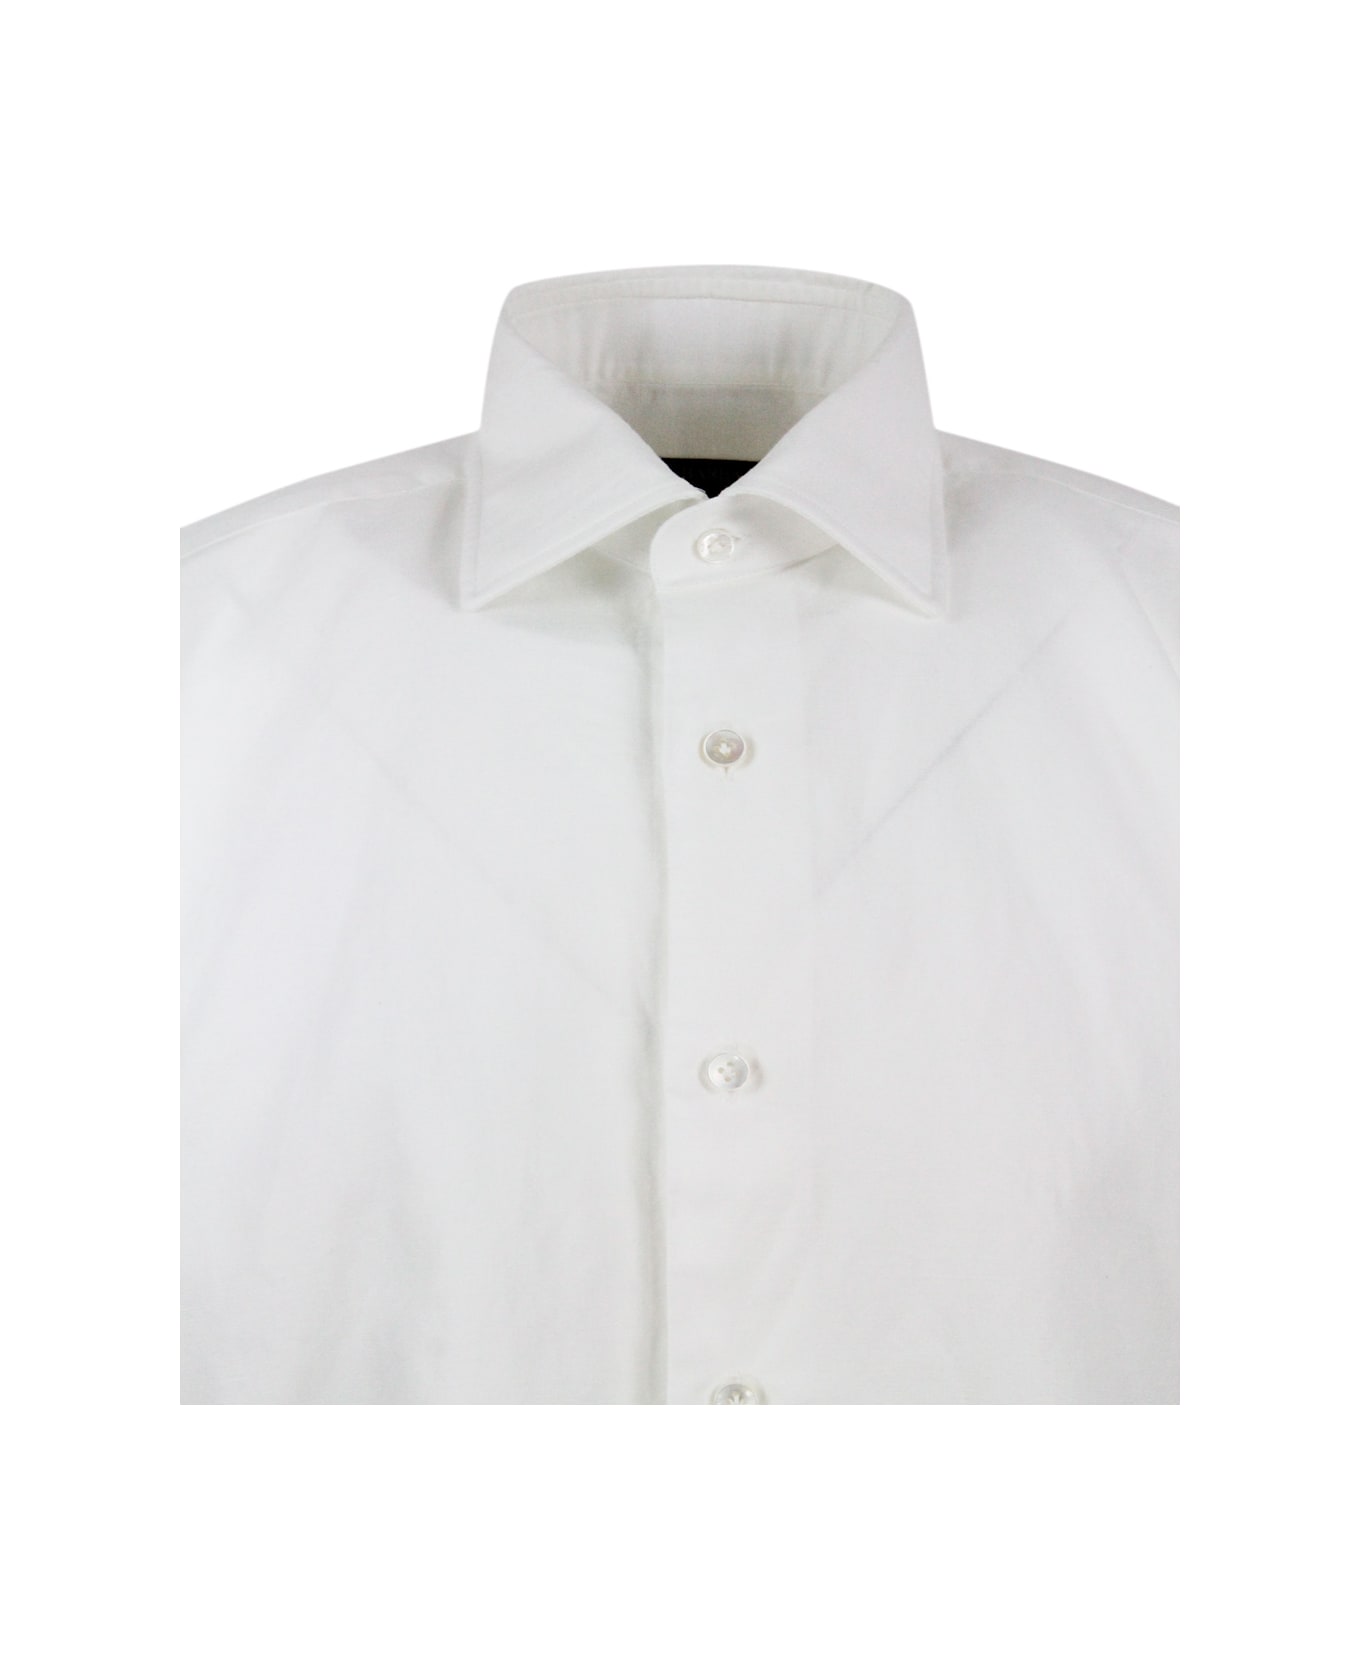 Barba Napoli Cult Shirt In Fine Cotton And Linen With Italian Collar And Hand-sewn With Mother-of-pearl Buttons - White シャツ